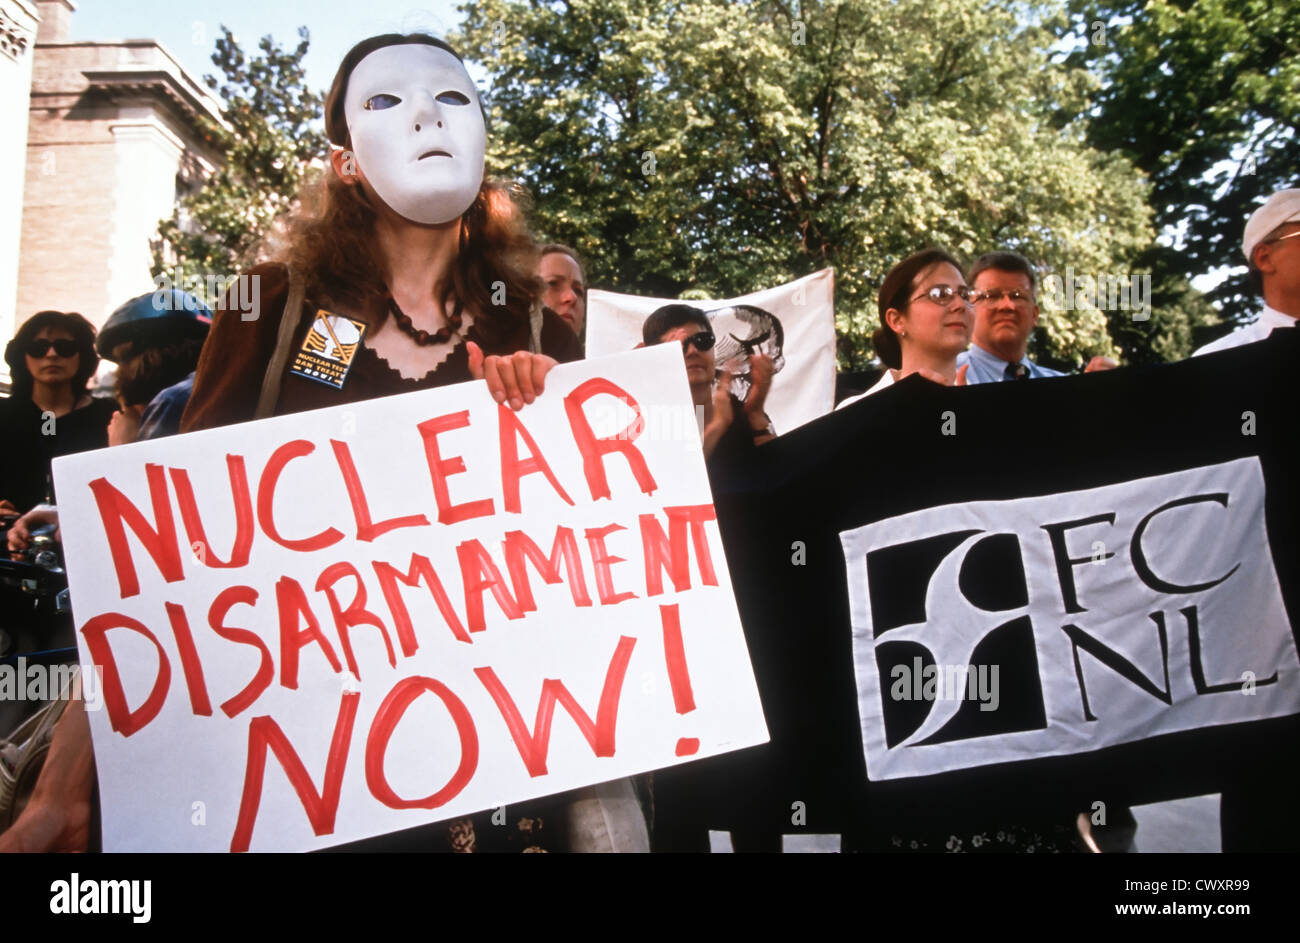 Greenpeace protestors, wearing masks, rally outside the Embassy of Pakistan, May 28, 1998 in Washington, DC. The protesters called for an end to nuclear arms race which has increased with Pakistan joining nuclear armed nations. Stock Photo